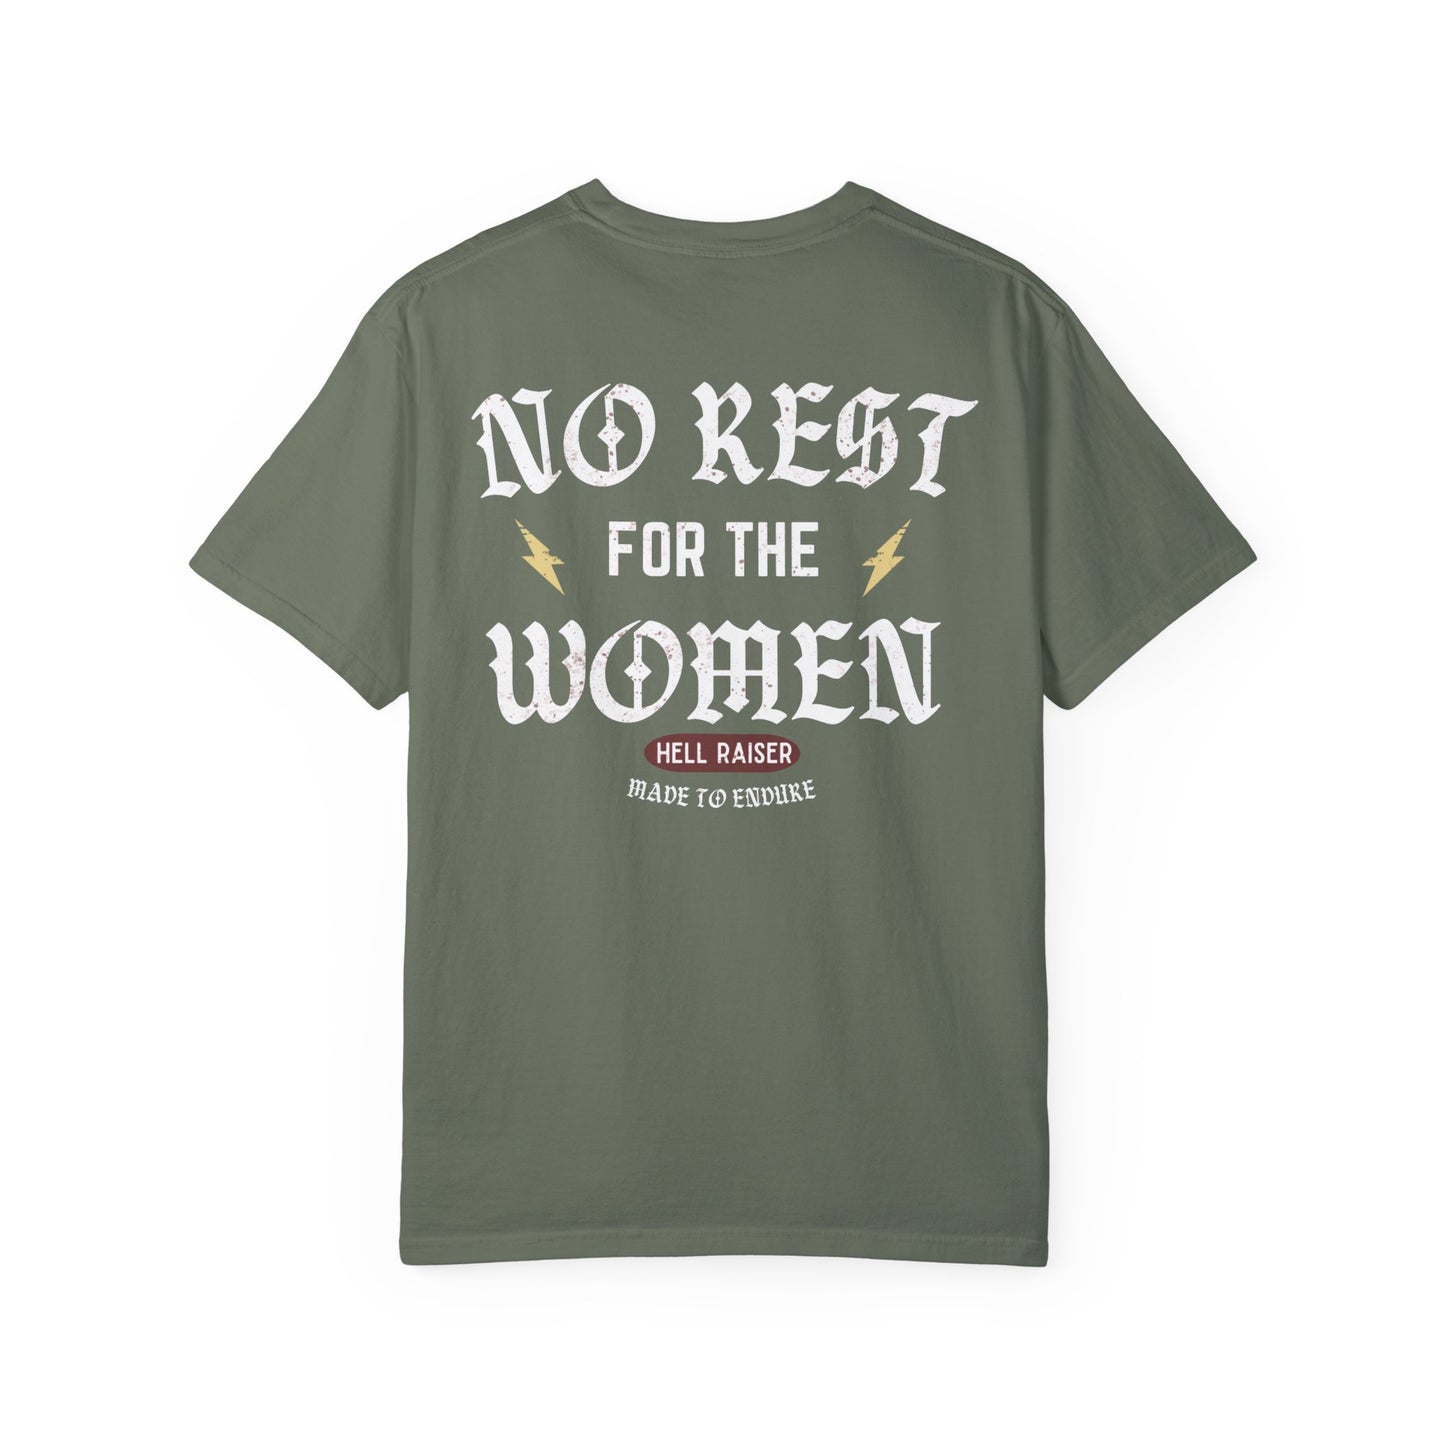 No Rest For The Women Tee